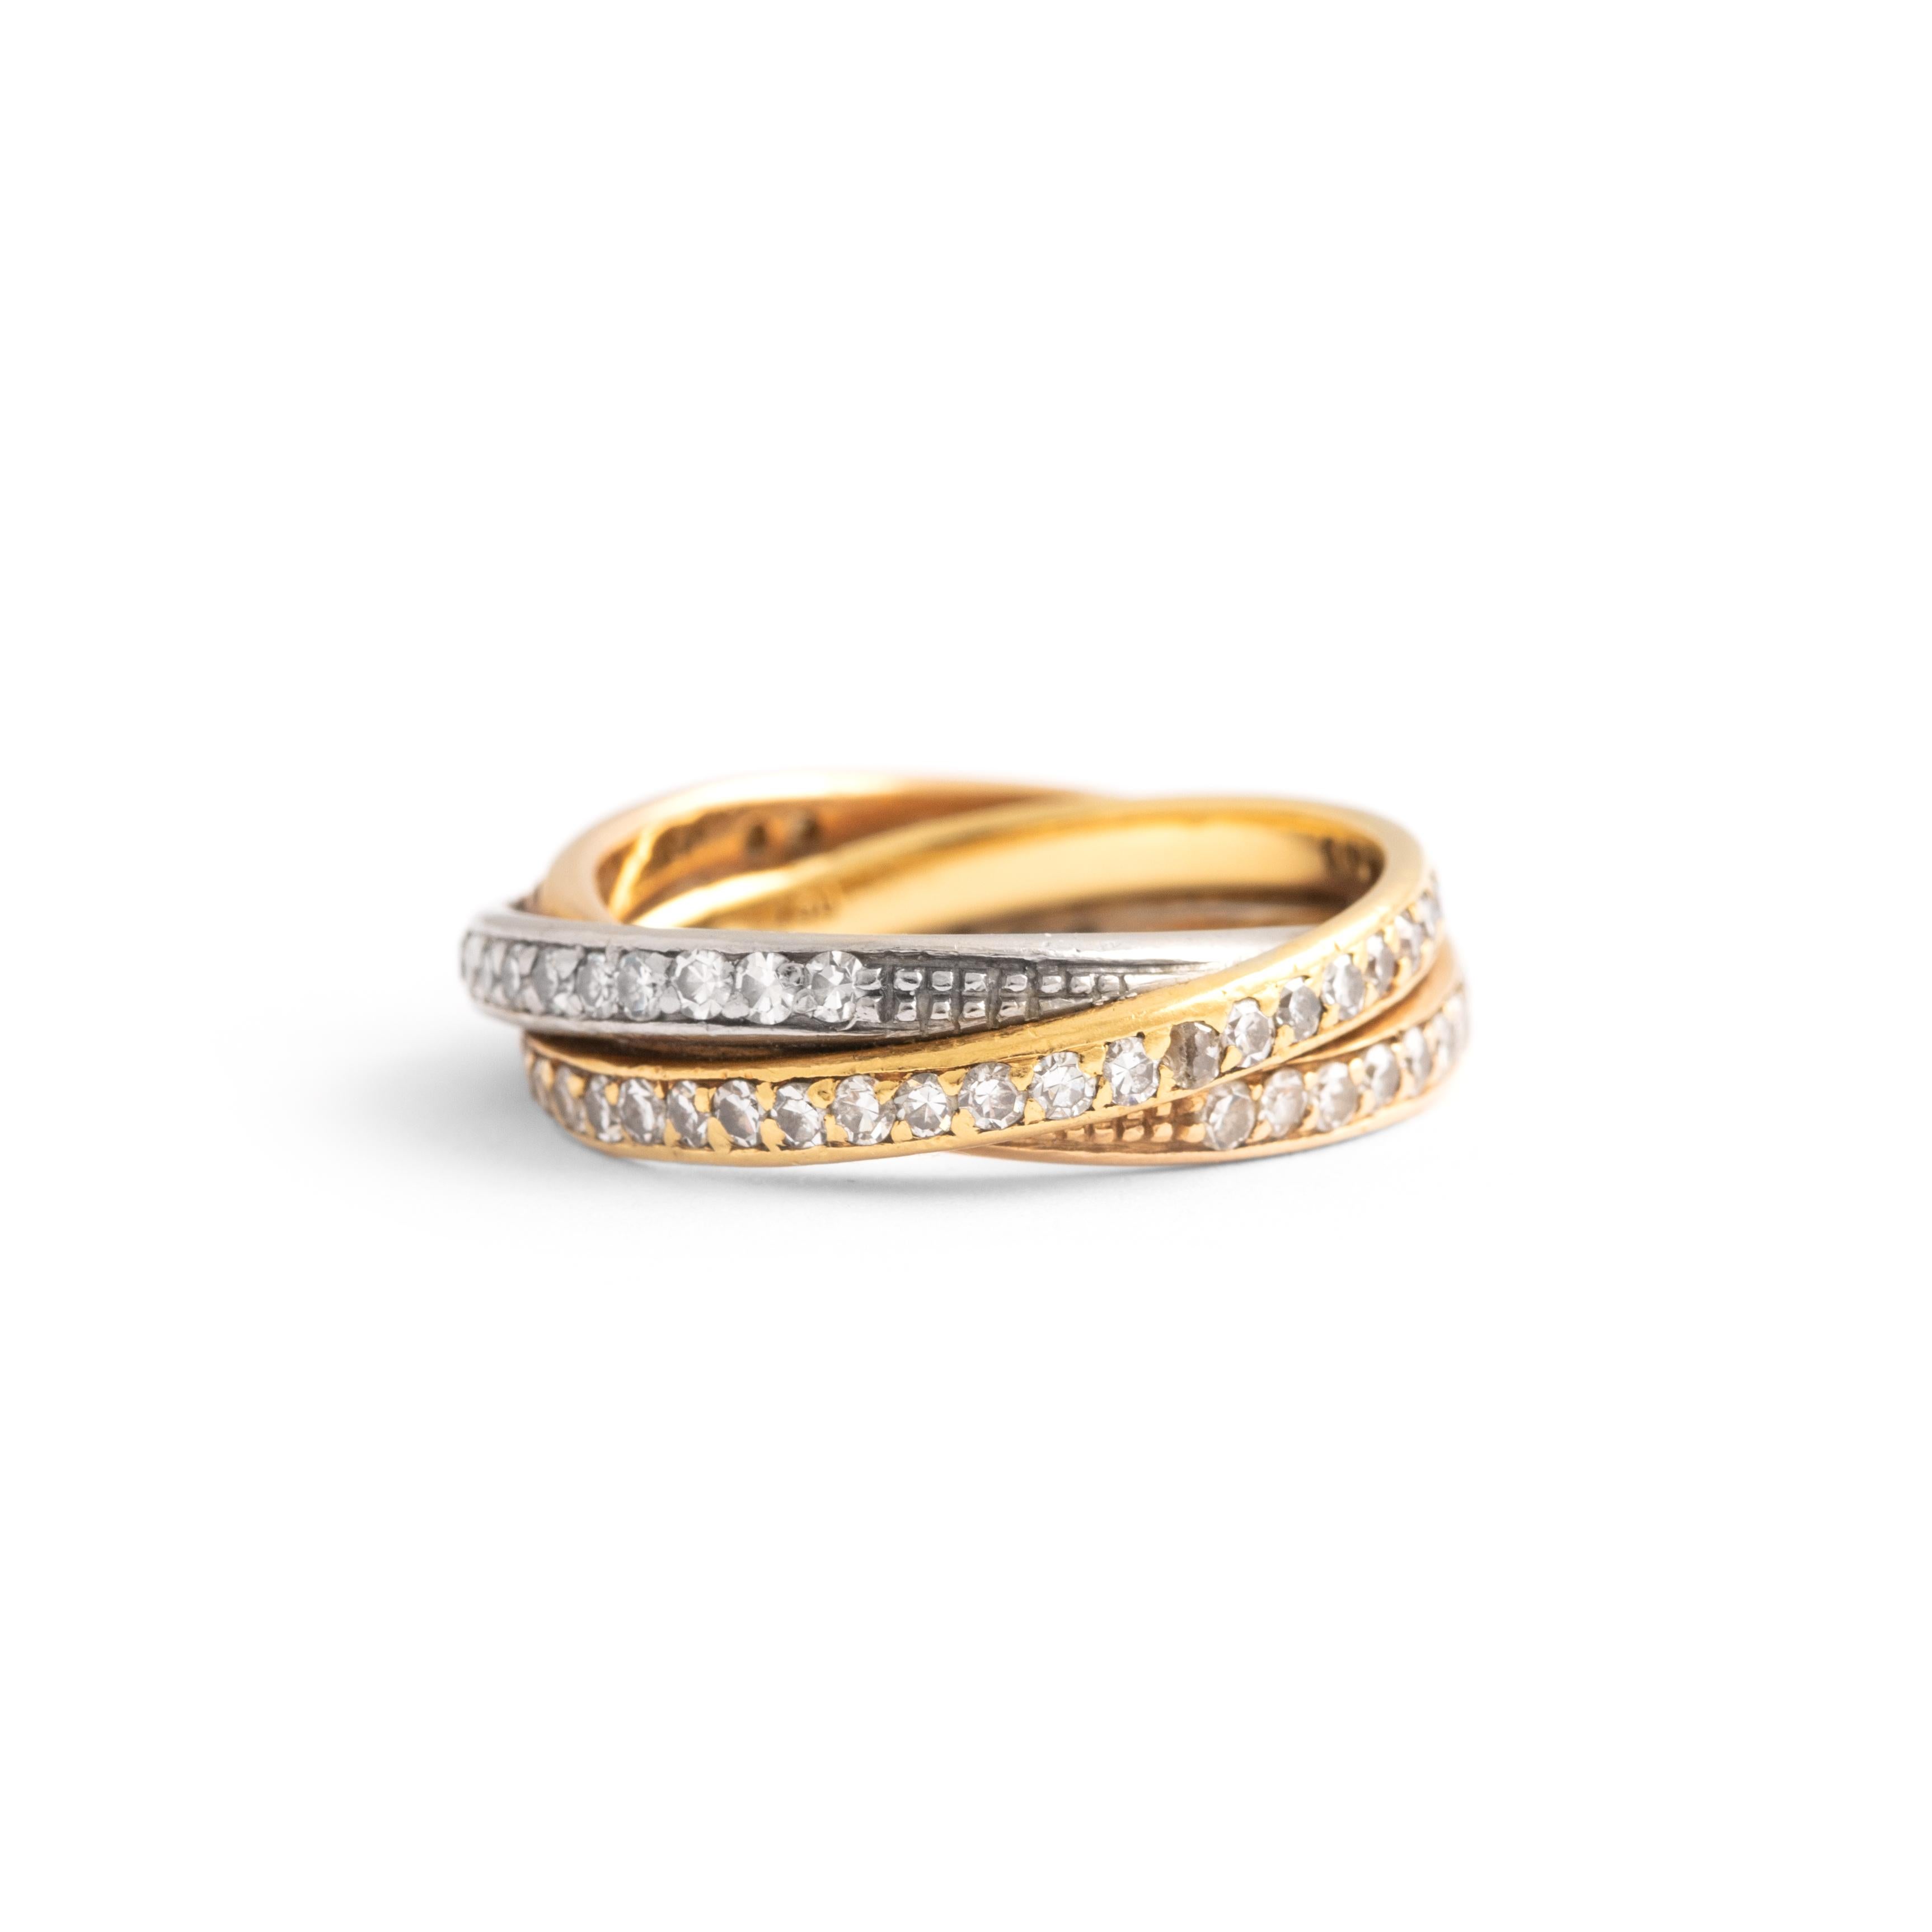 Diamond and yellow gold 18K band ring.
Size 50 (5 1/2 US).
Gross weight: 6.89 grams.